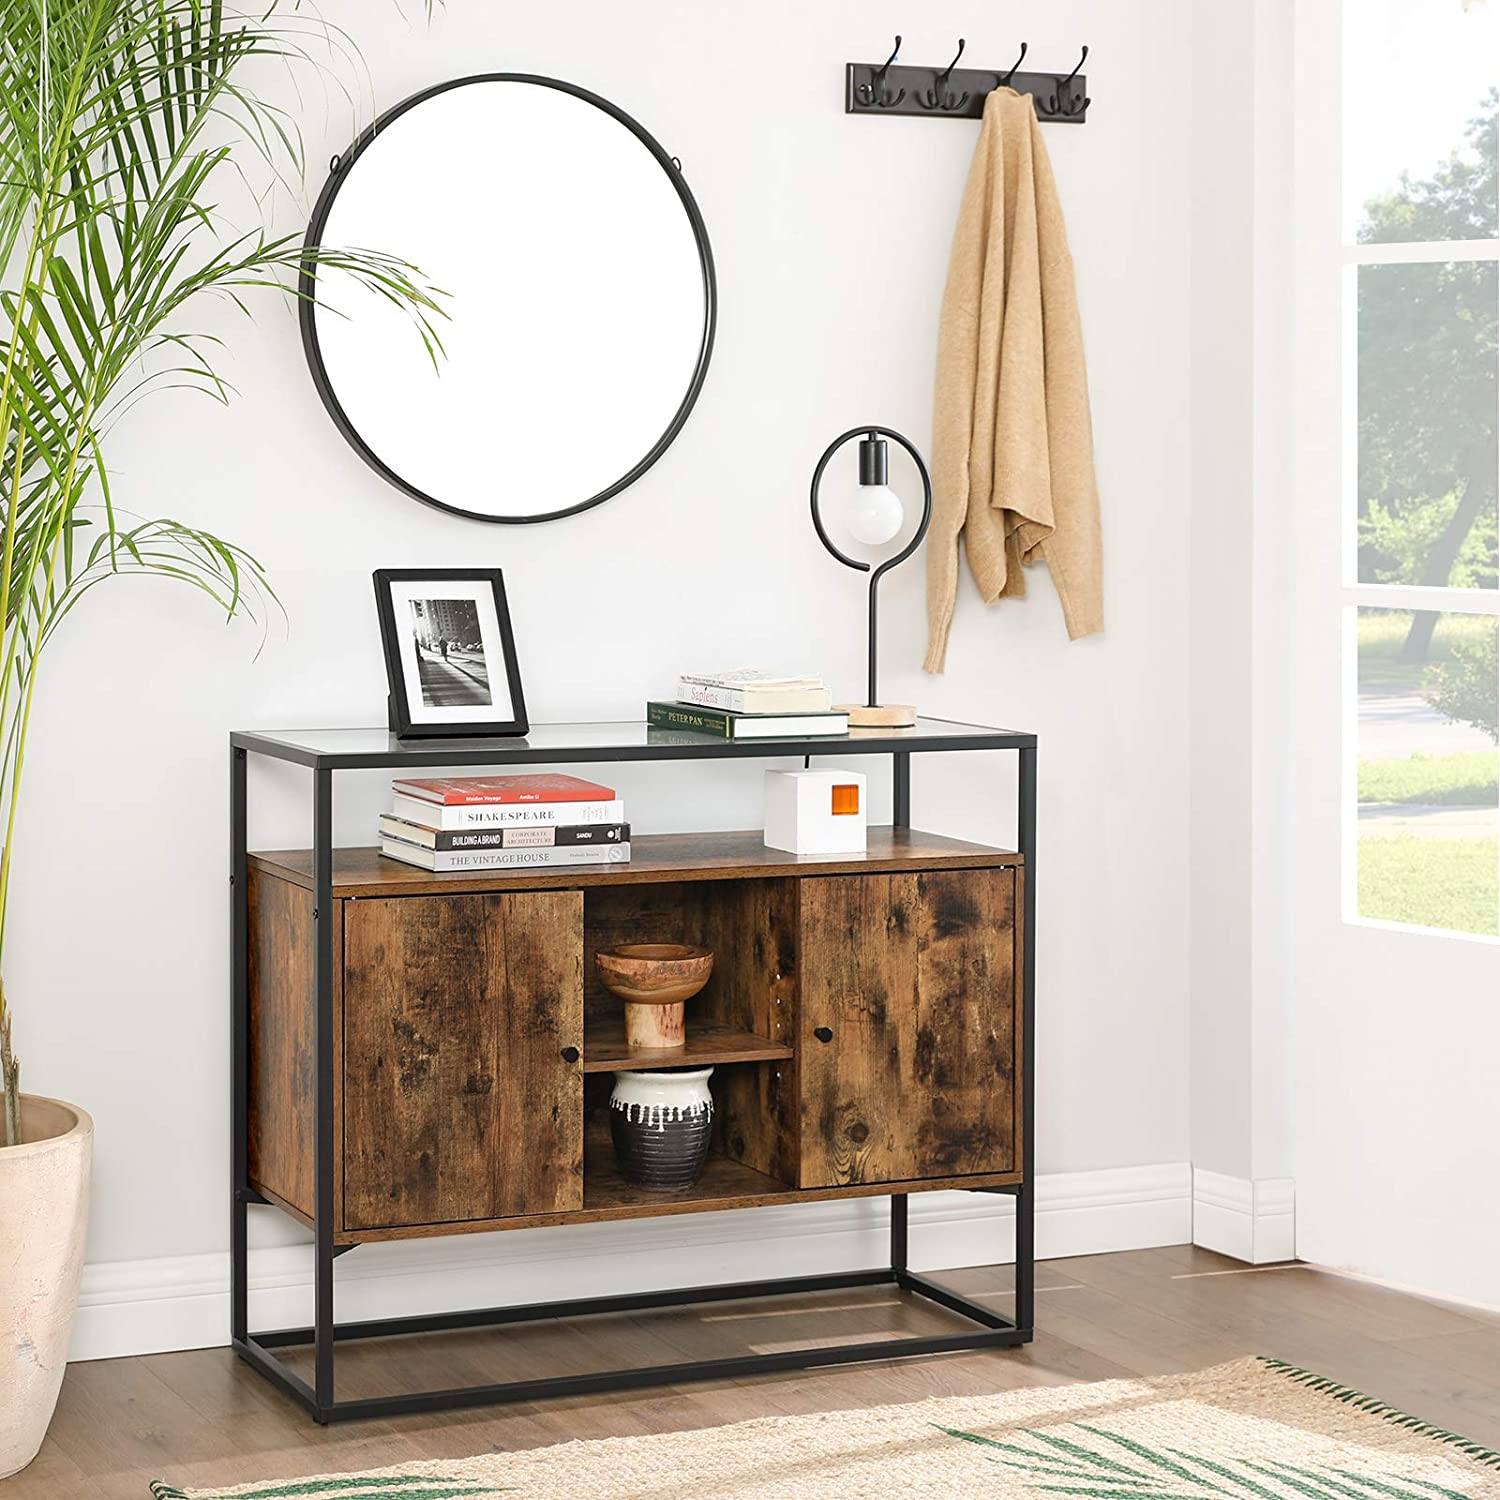 Sideboard, Side Cabinet, Storage Cabinet with Glass Surface and Open Compartments, Living Room, Hallway, Stable Steel Frame, Tempered Glass, Industrial, Rustic Brown and Black LSC014B01 RAW58.dk 